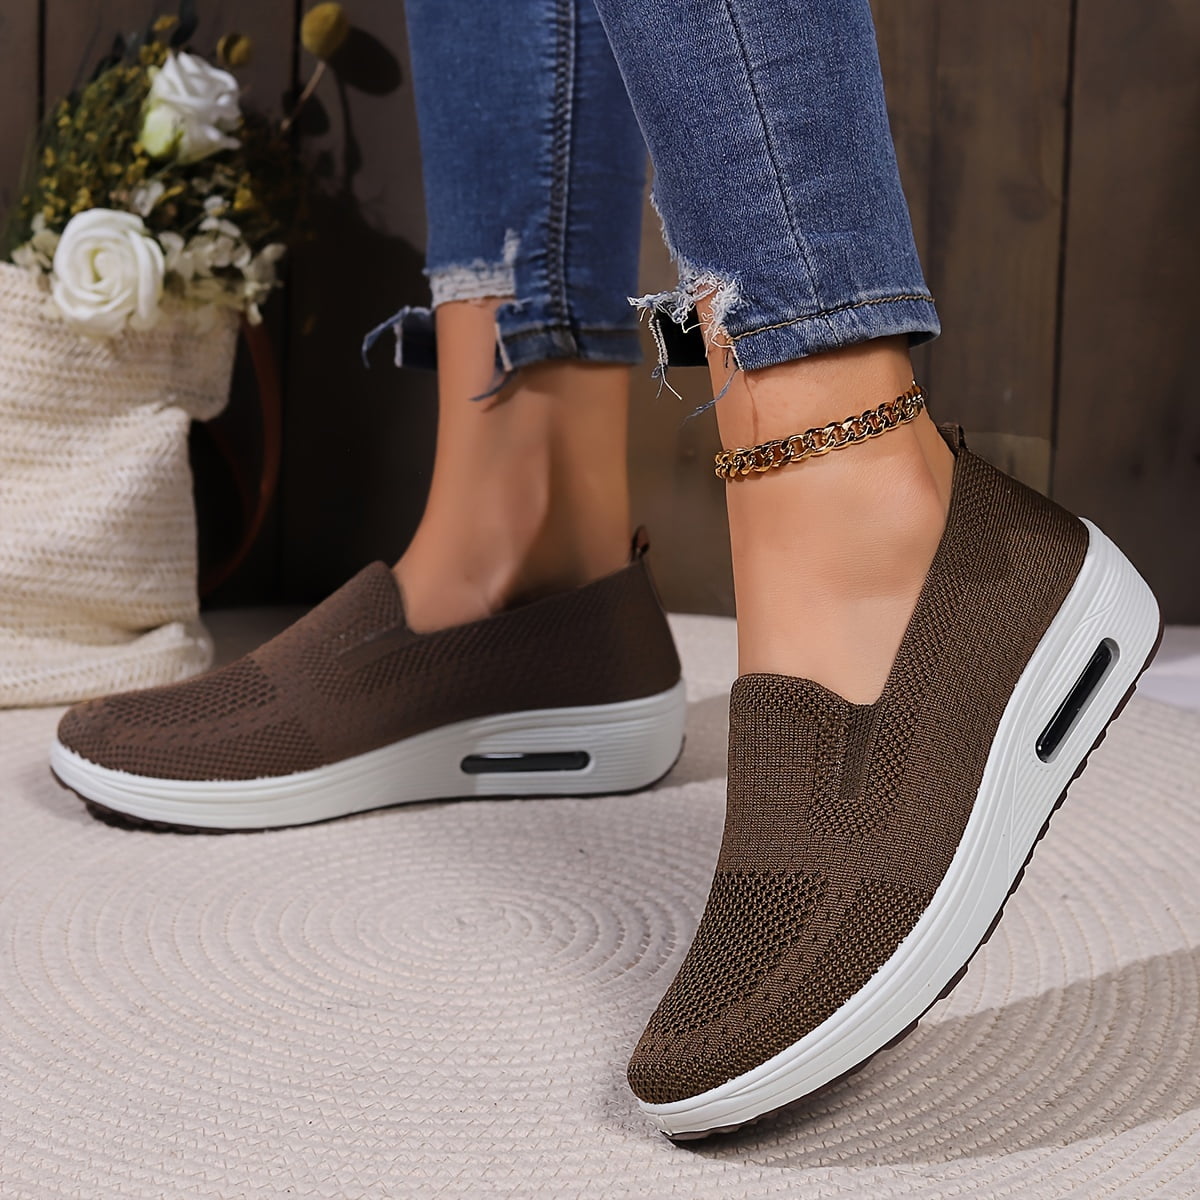 Women's Mule Sneakers, Casual Slip On Air Breathable Mesh Cushion Shoes ...